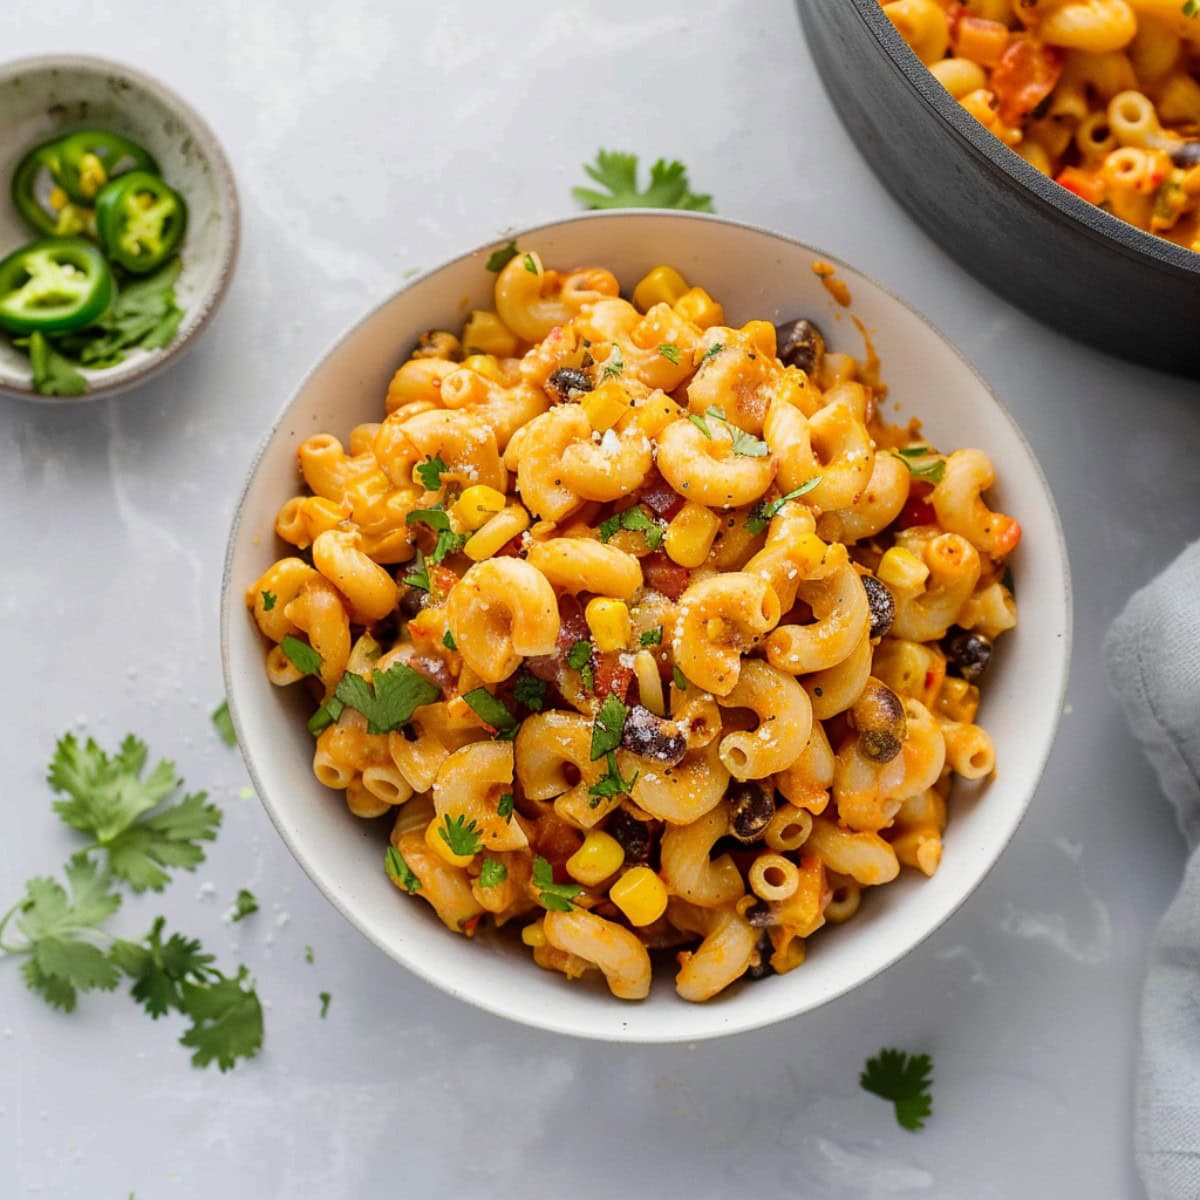 Fully loaded Mexican mac and cheese with black beans, red bell peppers, yellow onions and cilantro